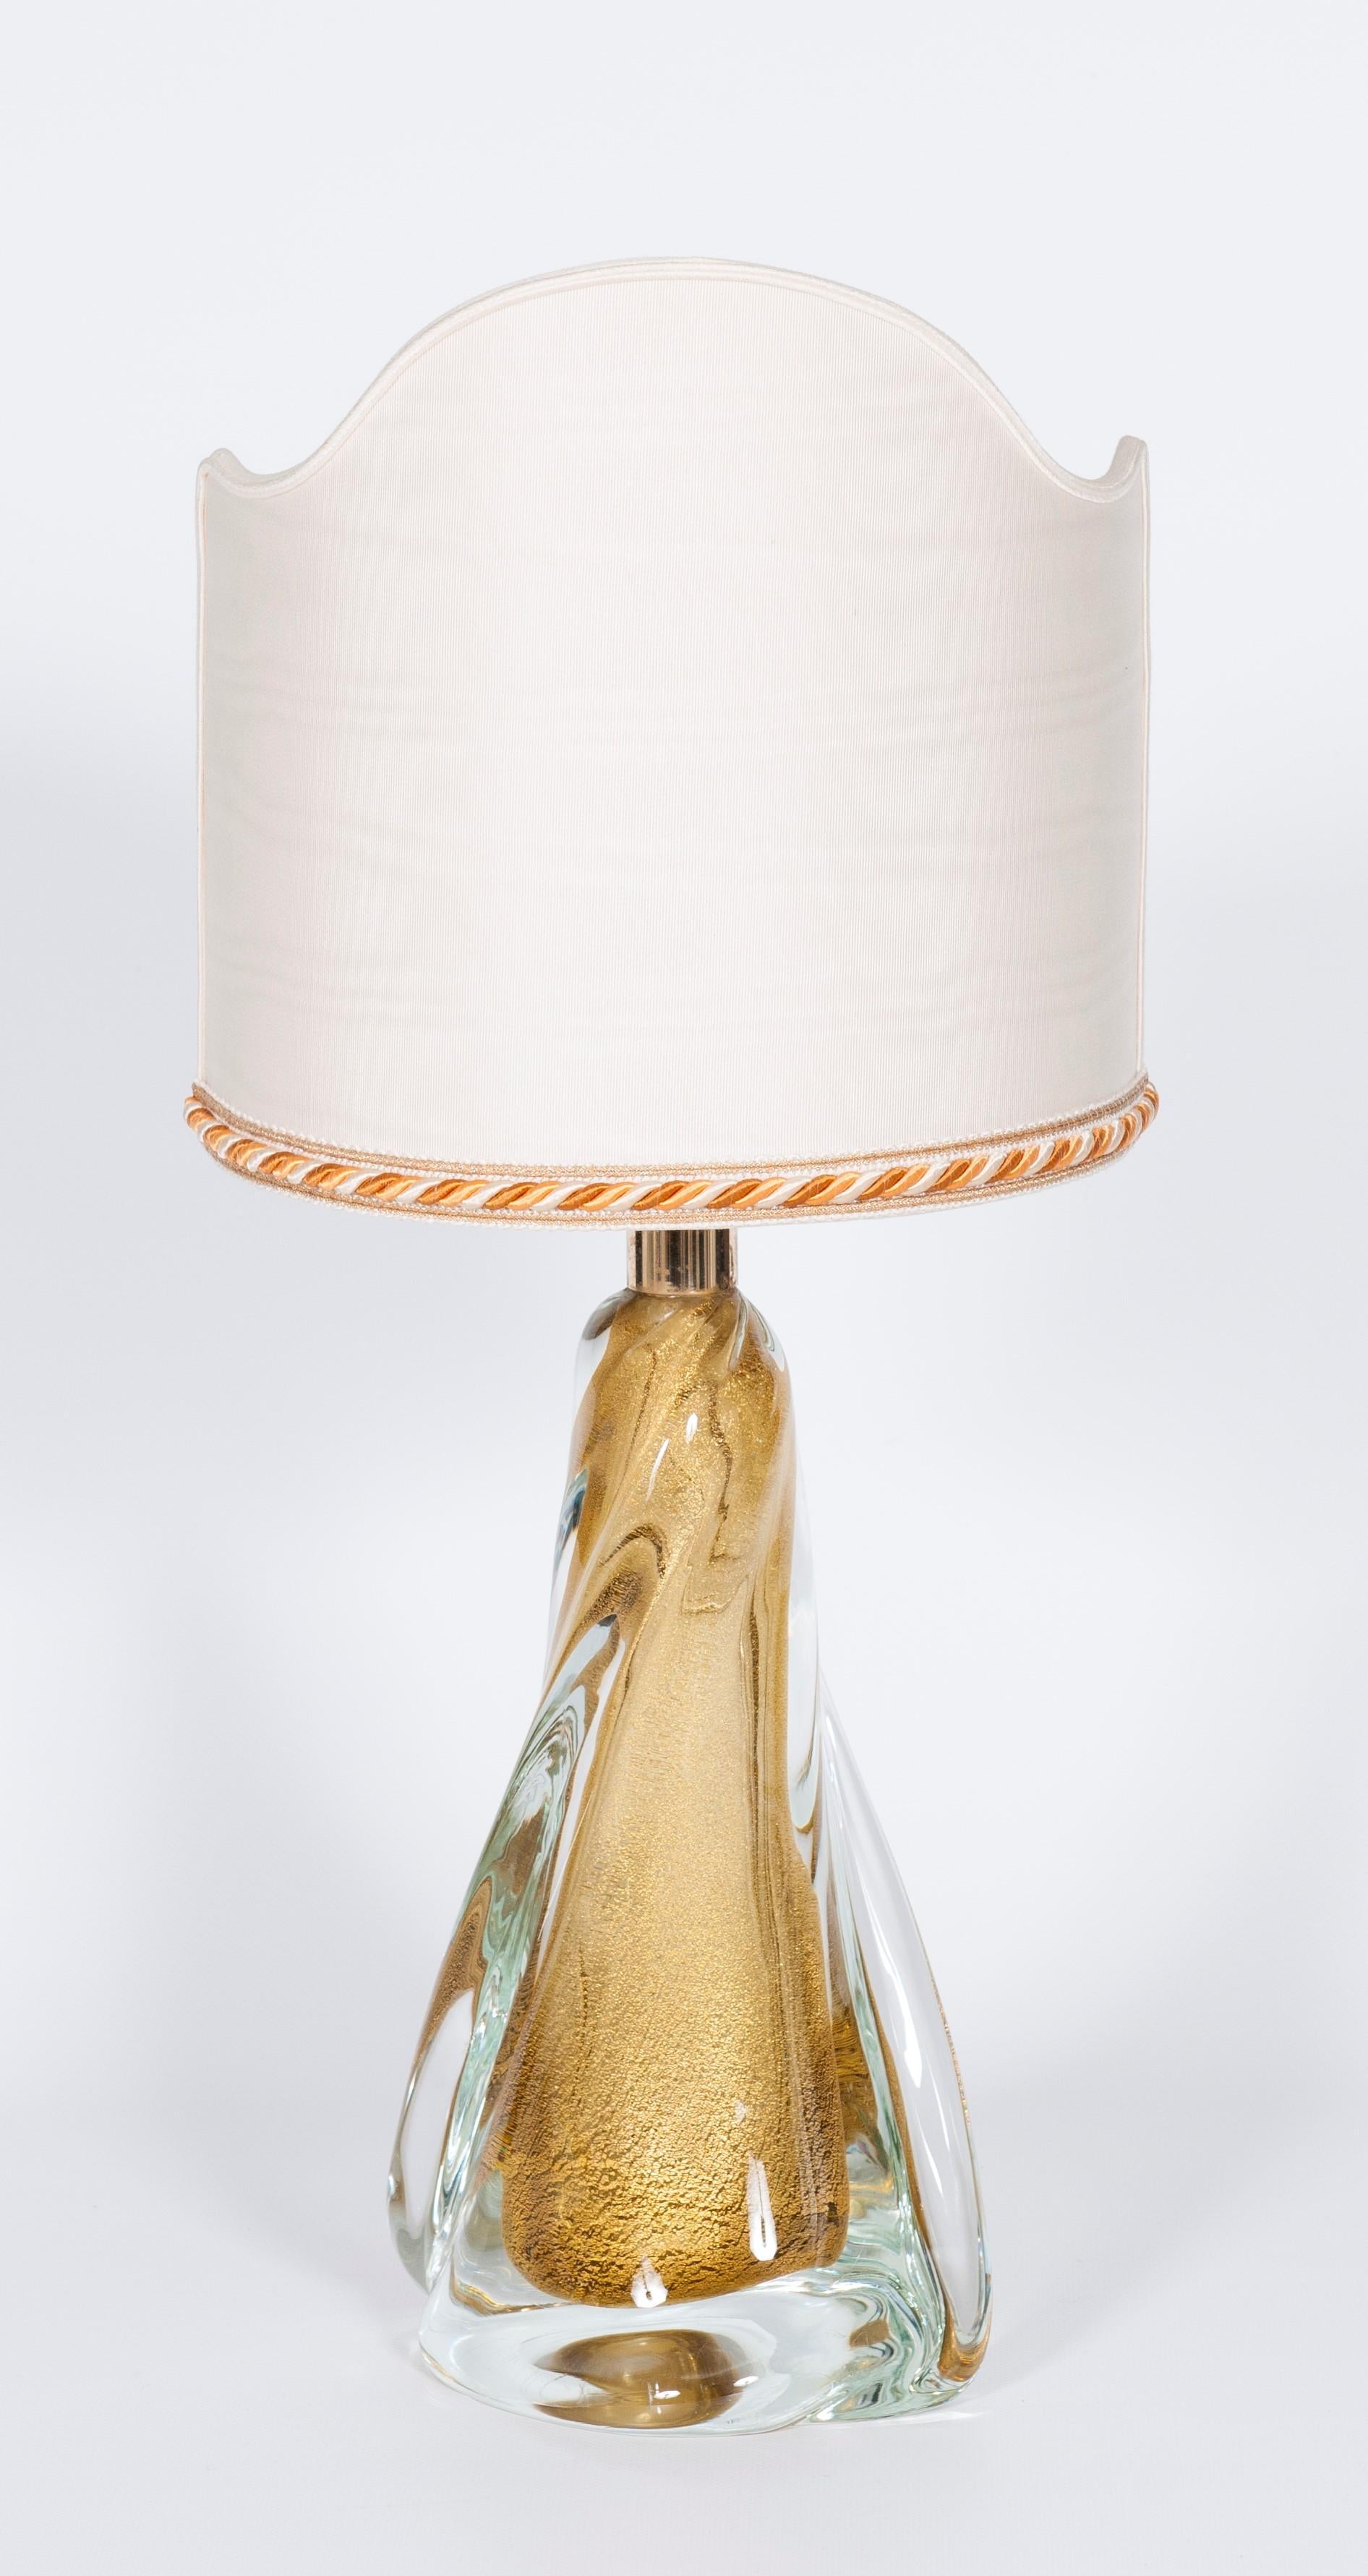 Massive Table Lamp in Artistic Murano Glass with Fan Shaped Gold body 1980s
Table lamp, entirely handcrafted in Murano Island, Venice, in blown artistic Murano glass, attributed to Seguso.
The base of the lamp is of transparent glass with sunken